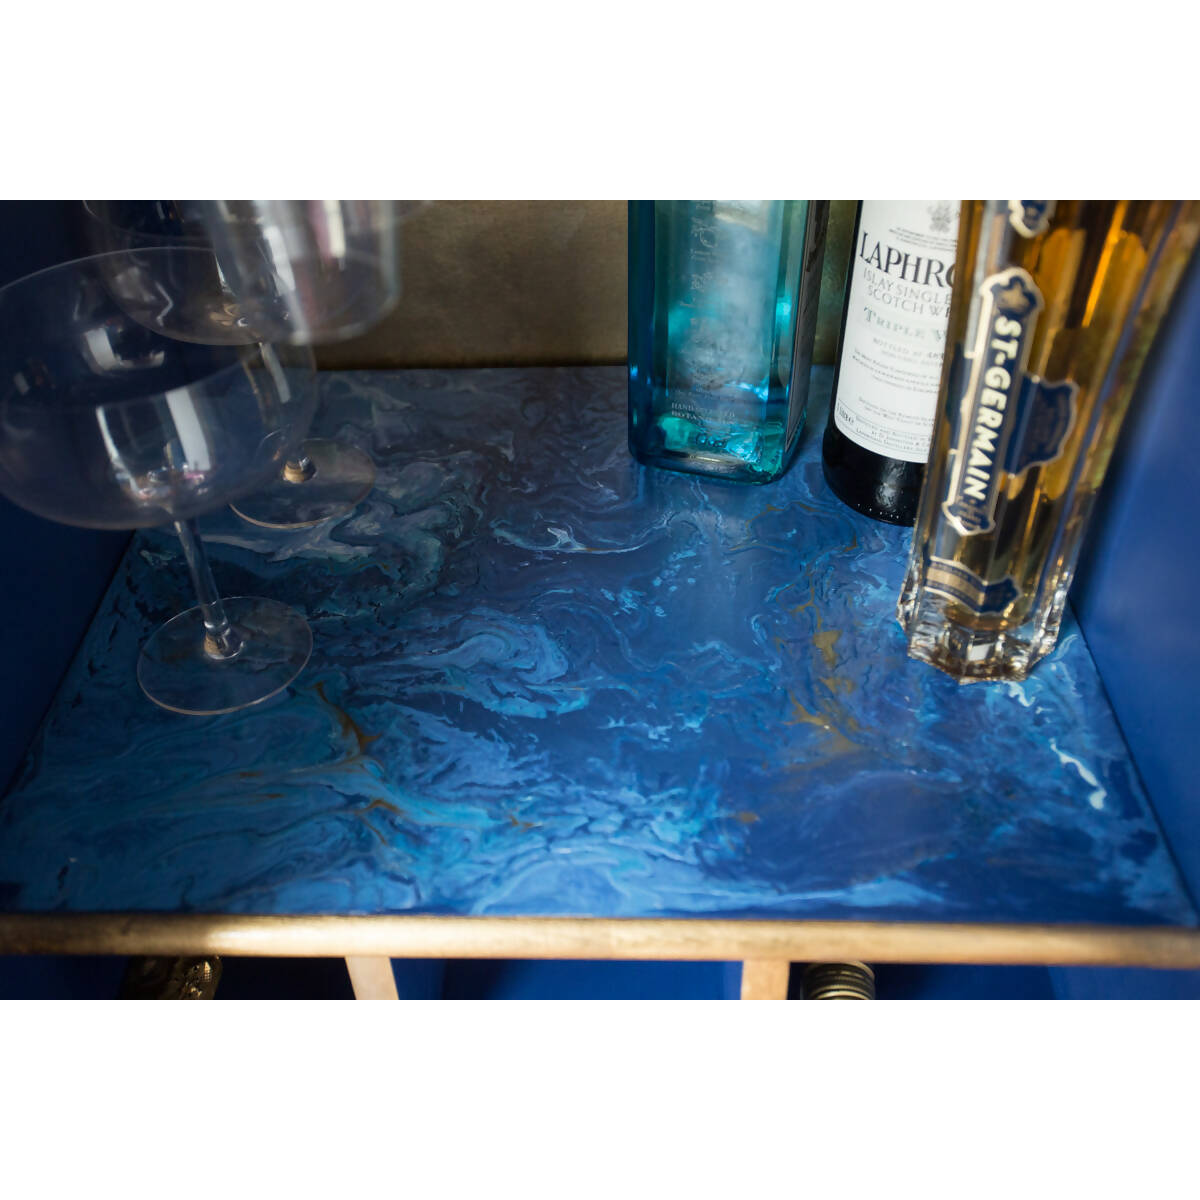 Marbled 'Bardrobe' - Wardrobe Converted Into Drinks Cabinet